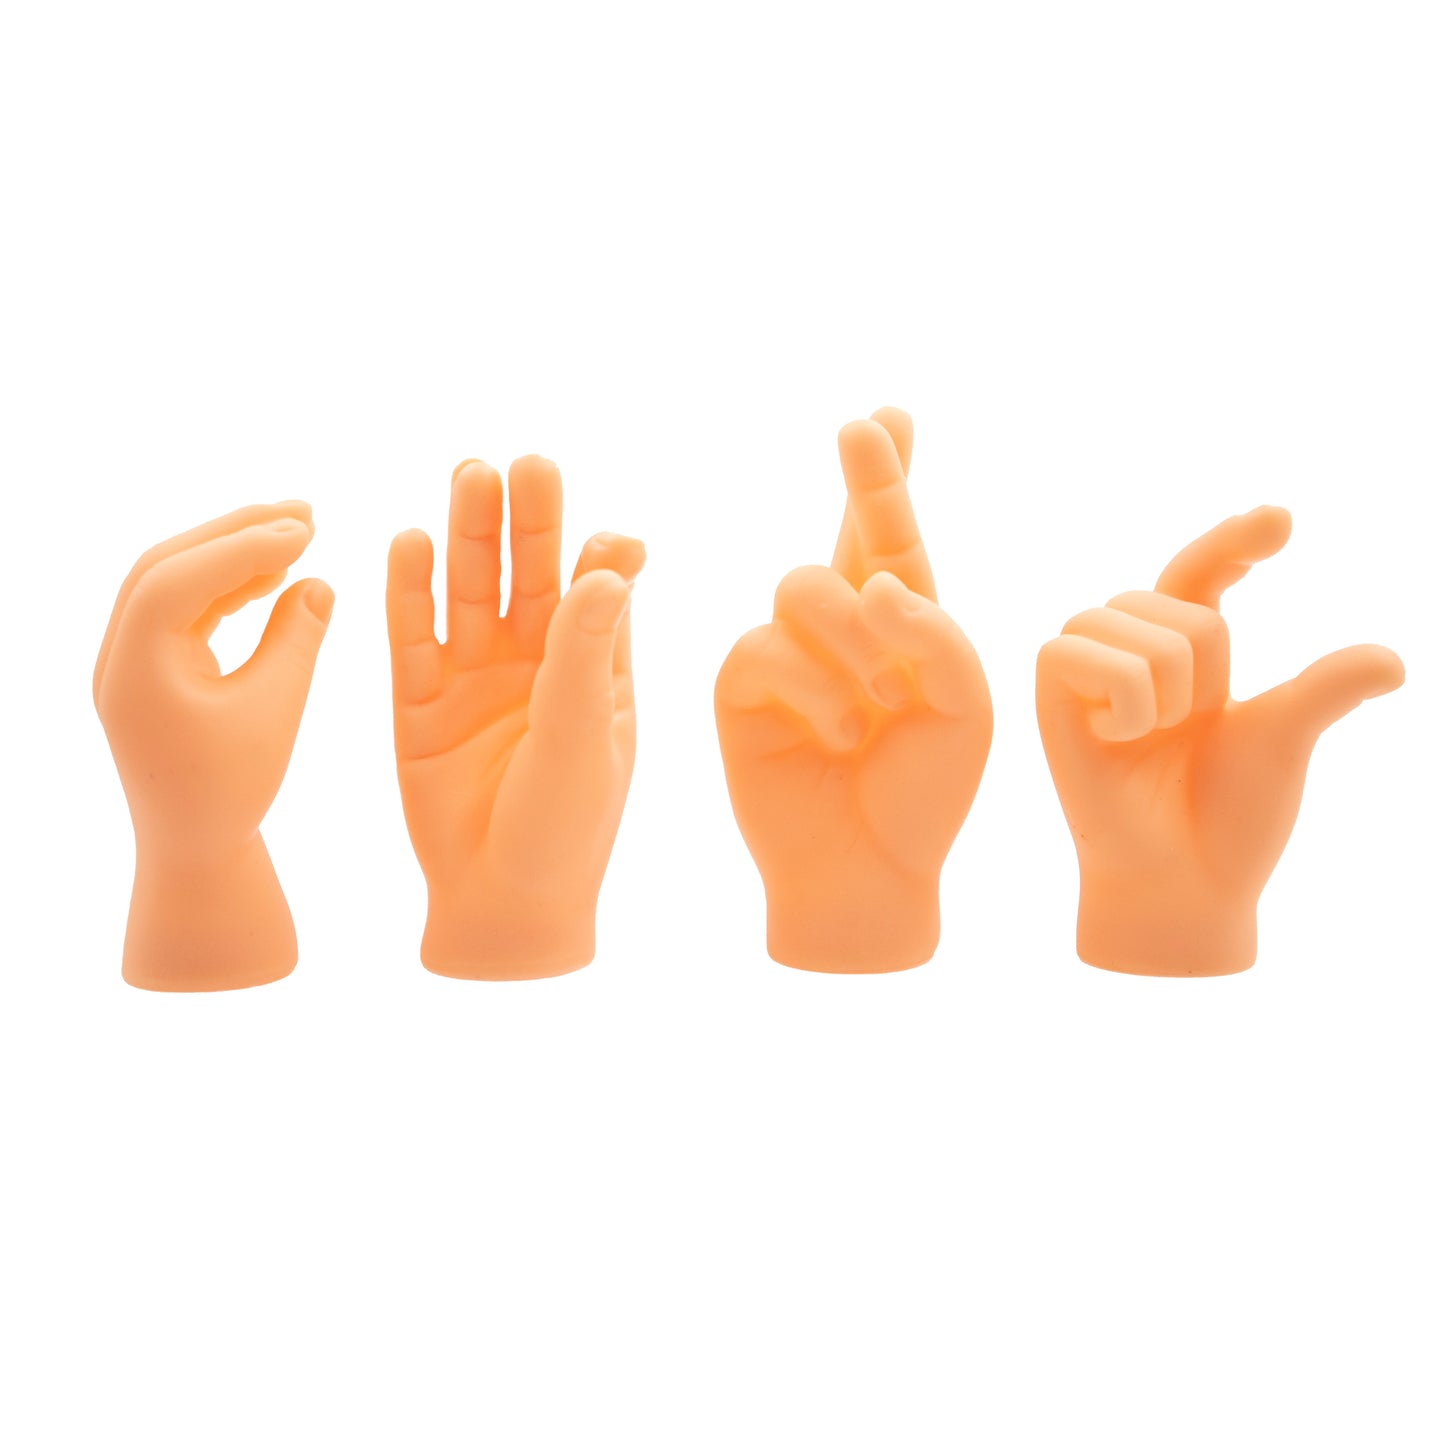 Tiny Hands Assorted 4-Pack